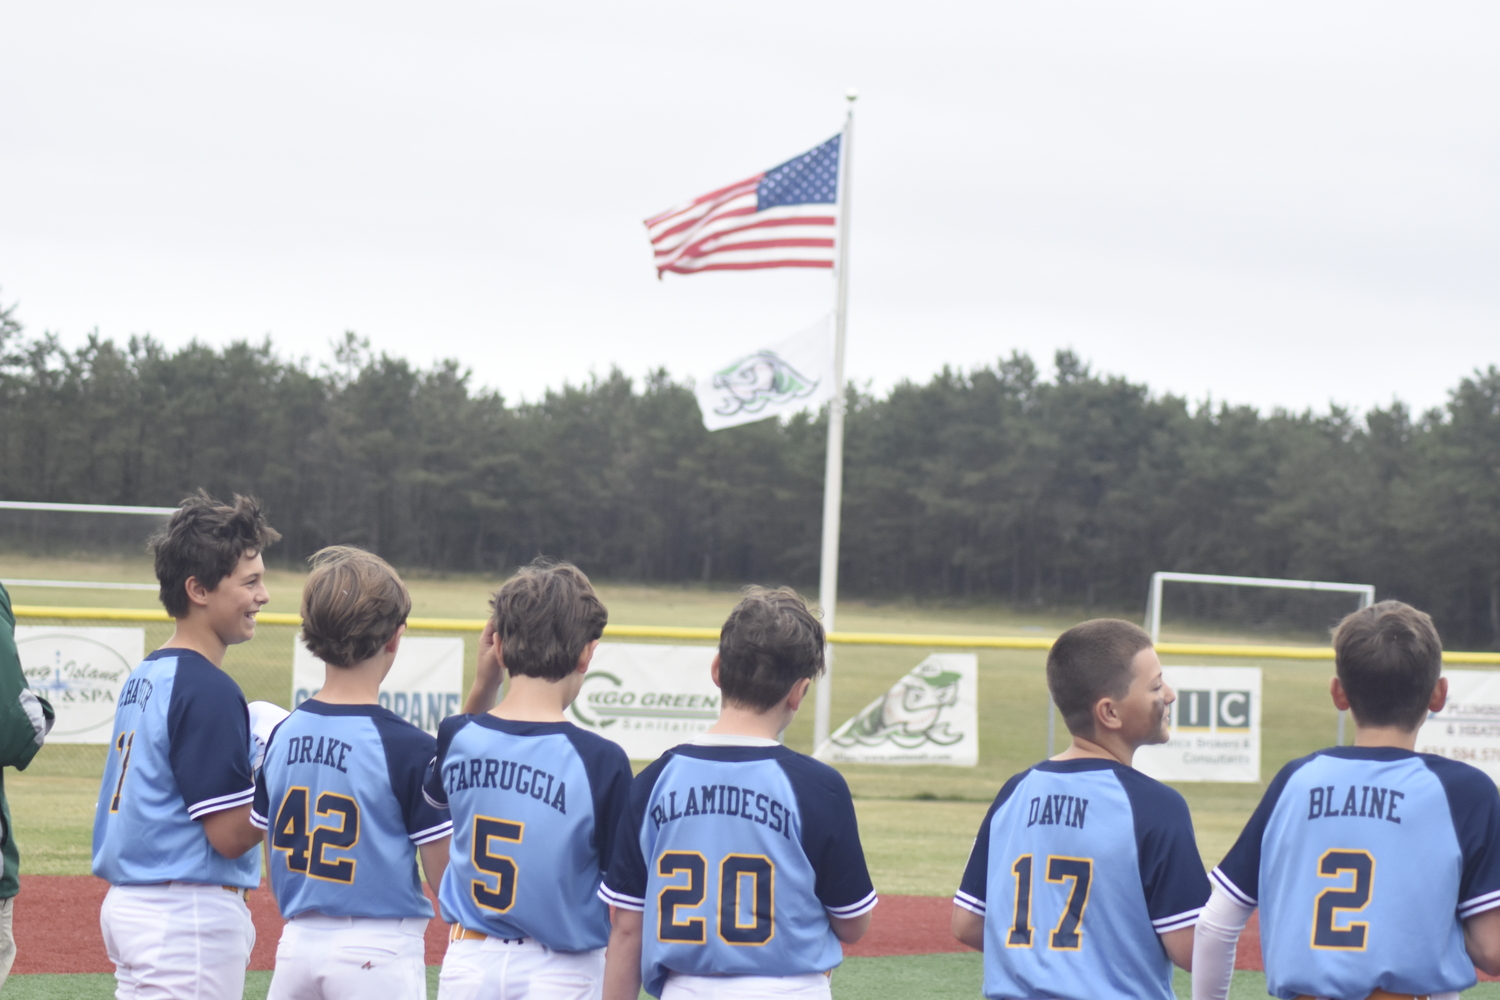 The East End 12U baseball All-Stars line up for the national anthem just prior to their opening game of the District 36 Tournament at Hampton West Park in Westhampton on Thursday, June 22.   DREW BUDD